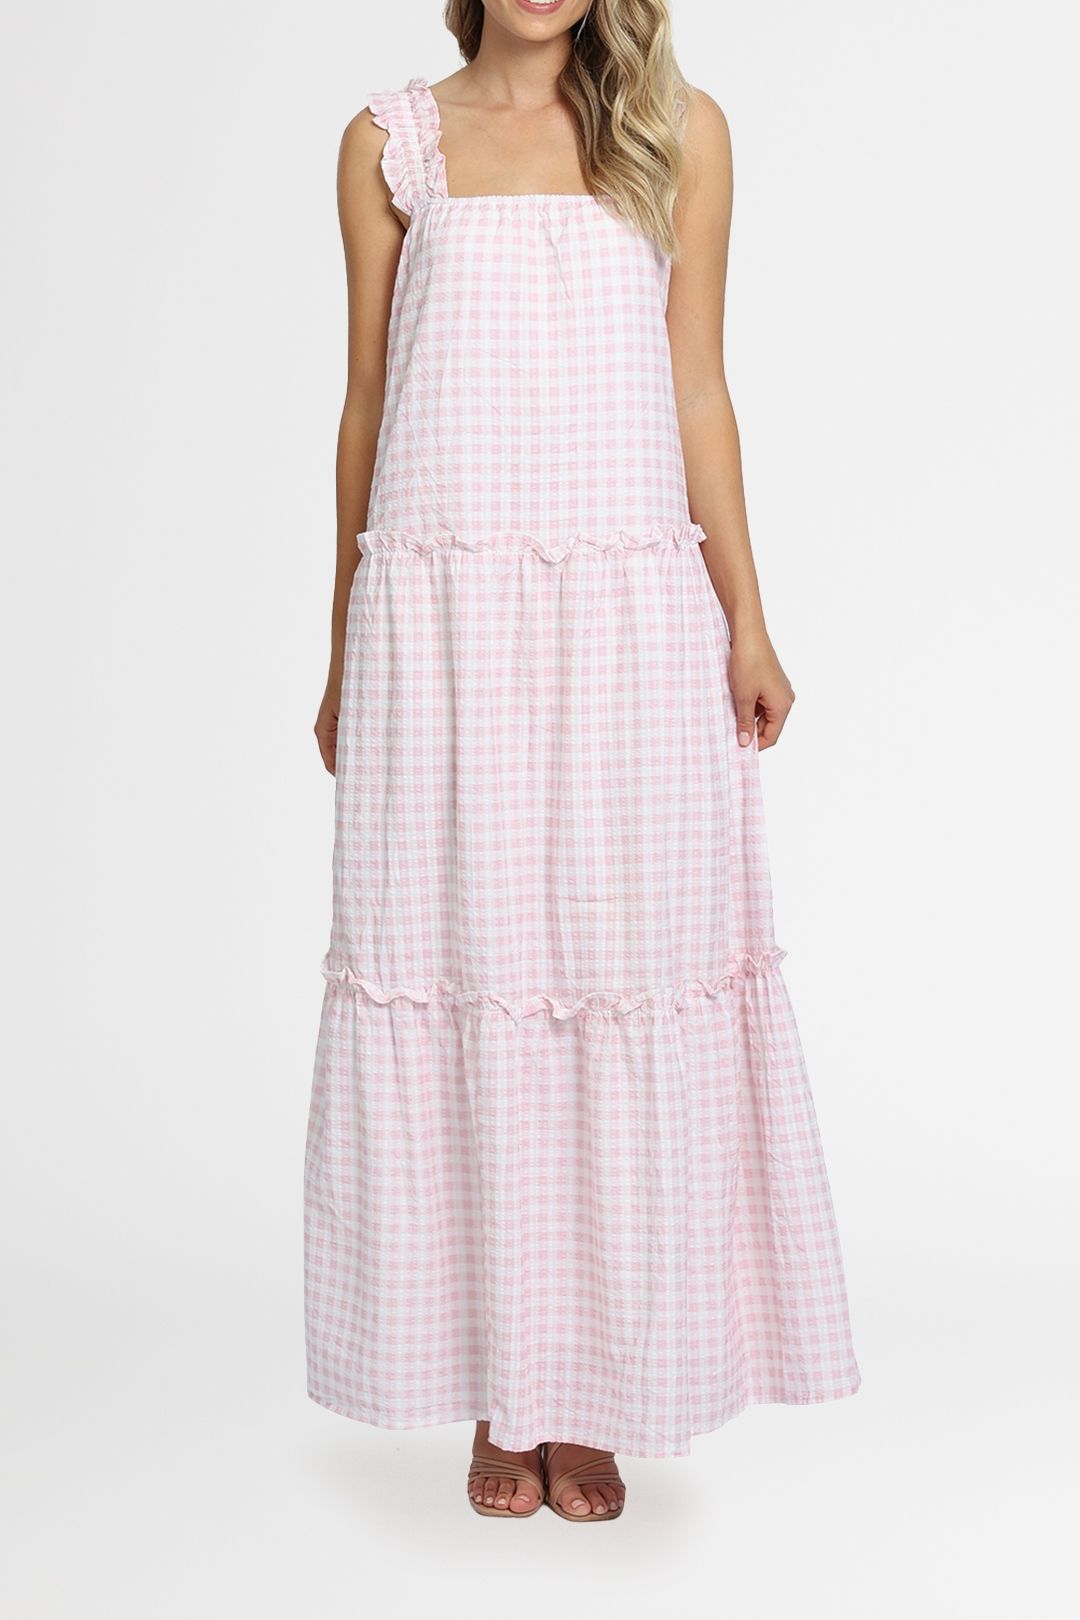 Charlie Holiday Lottie Maxi Dress Pink Gingham